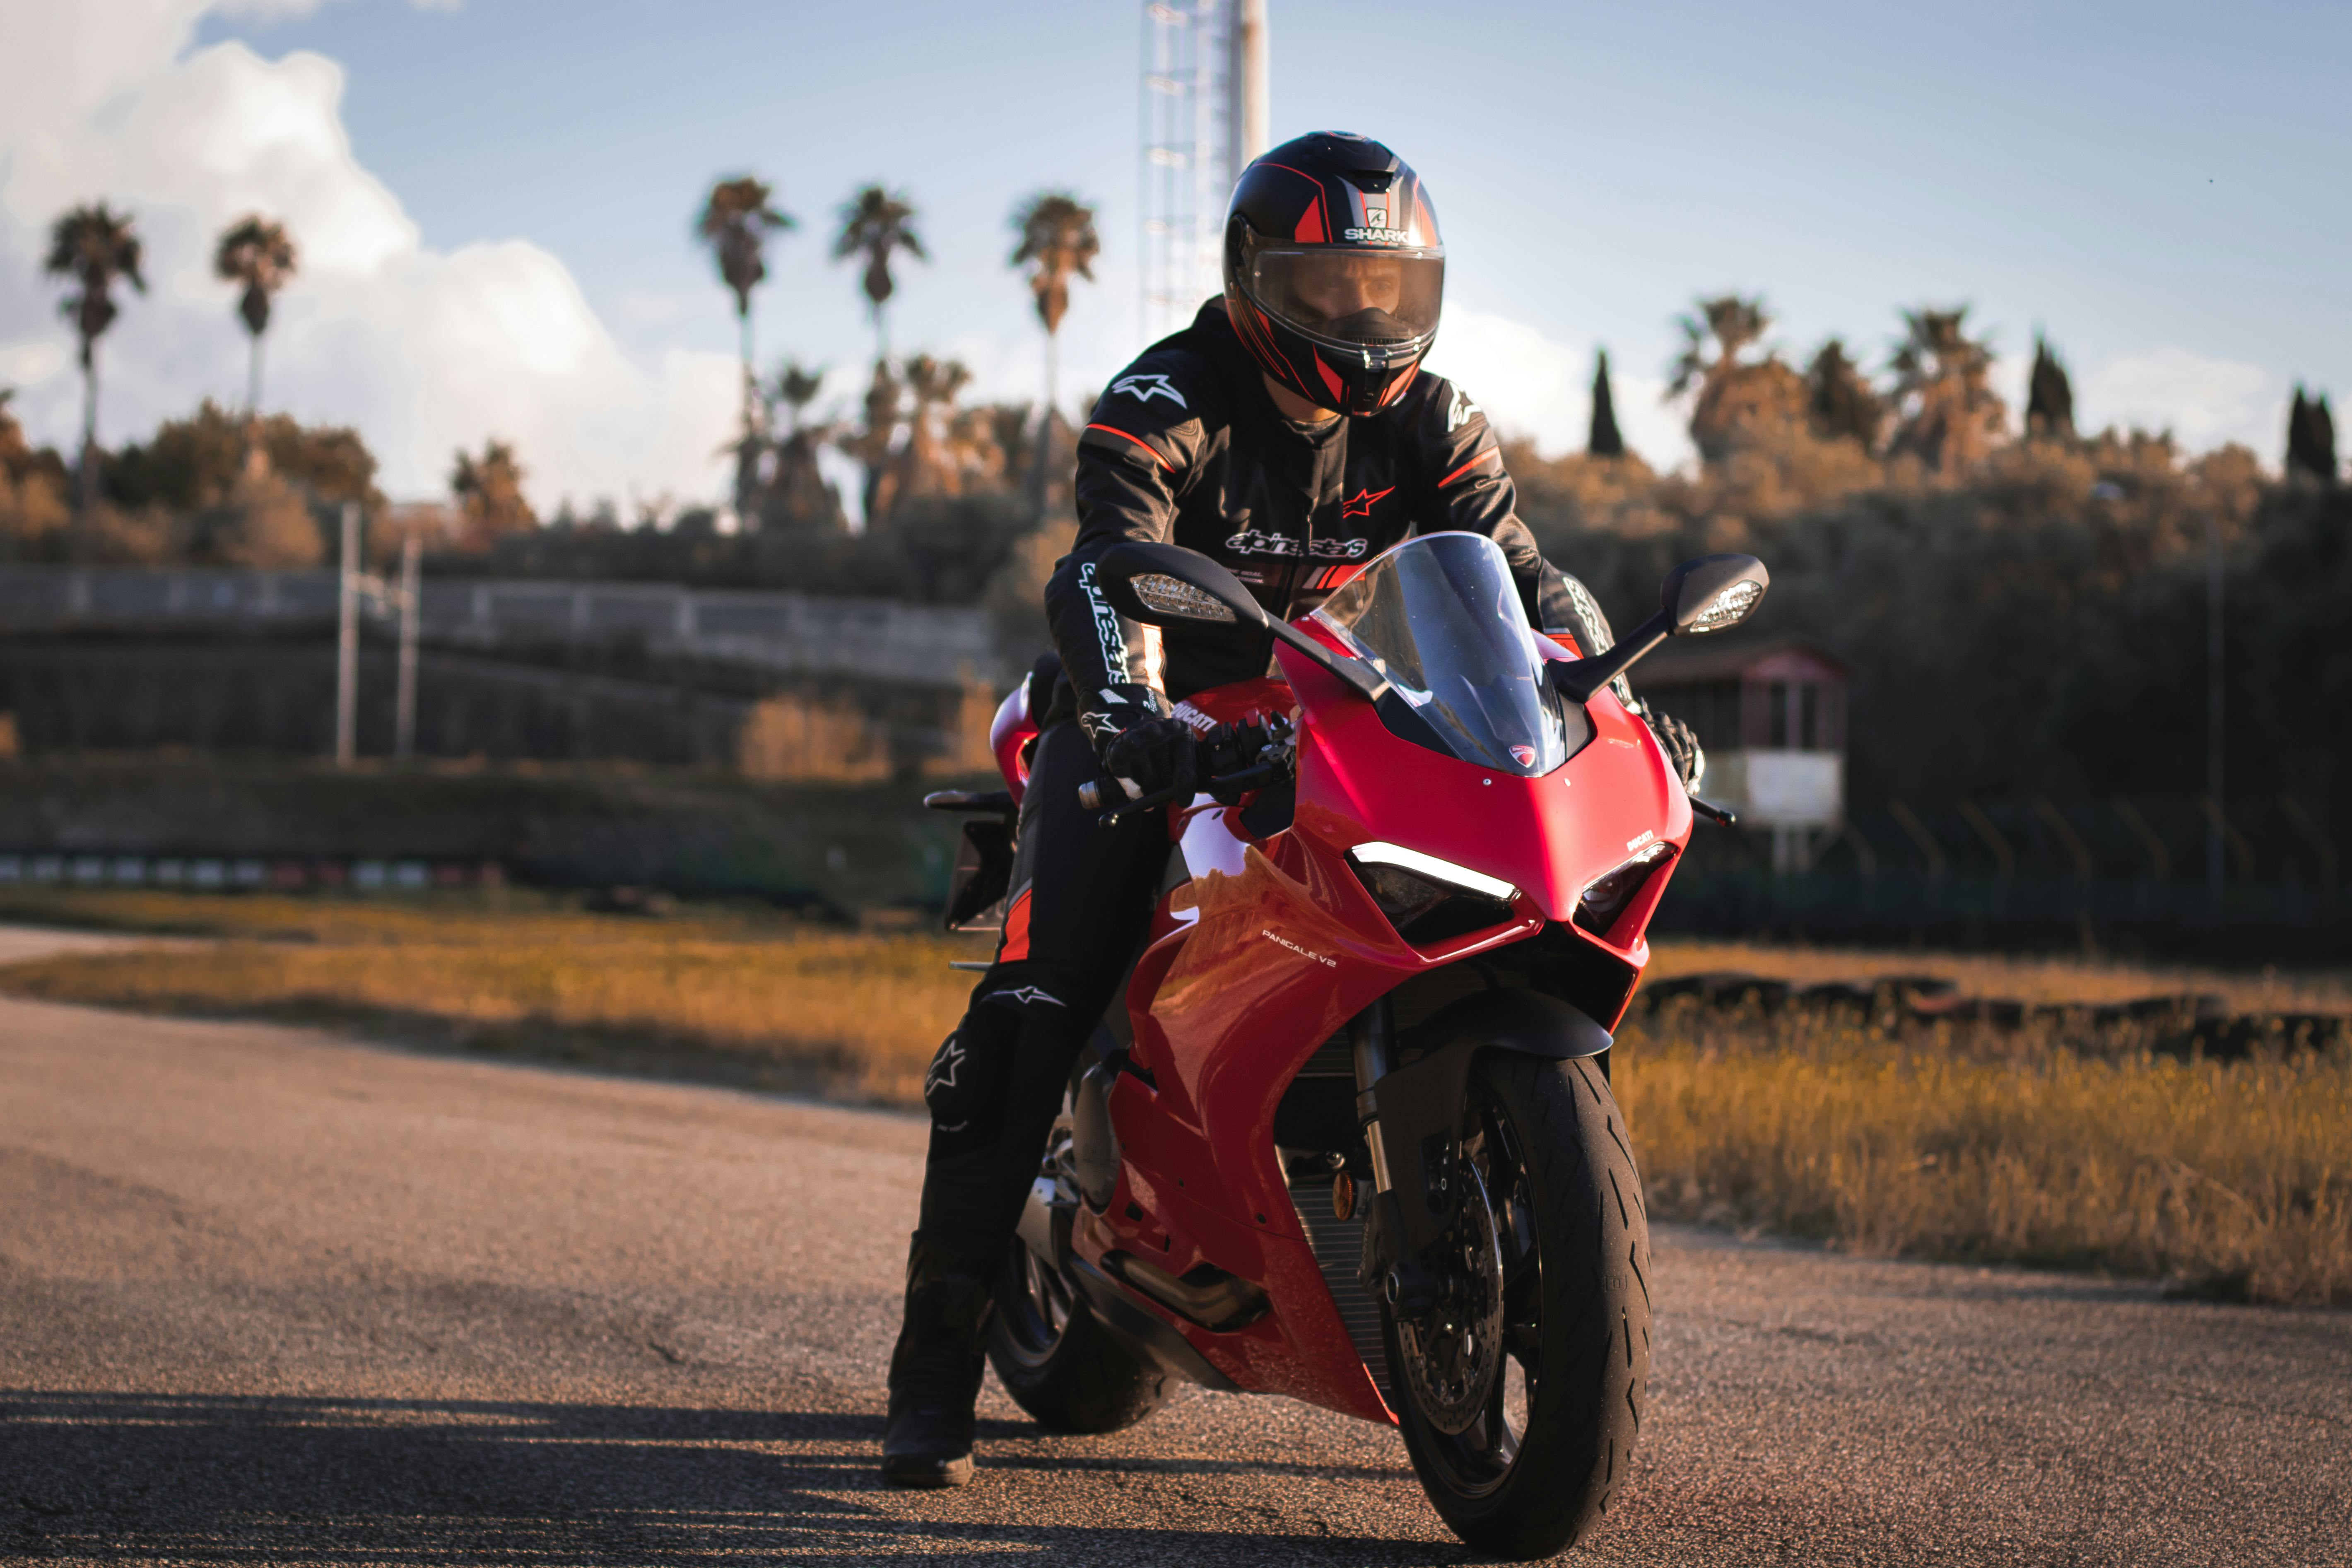 Ducati Photos, Download The BEST Free Ducati Stock Photos & HD Images